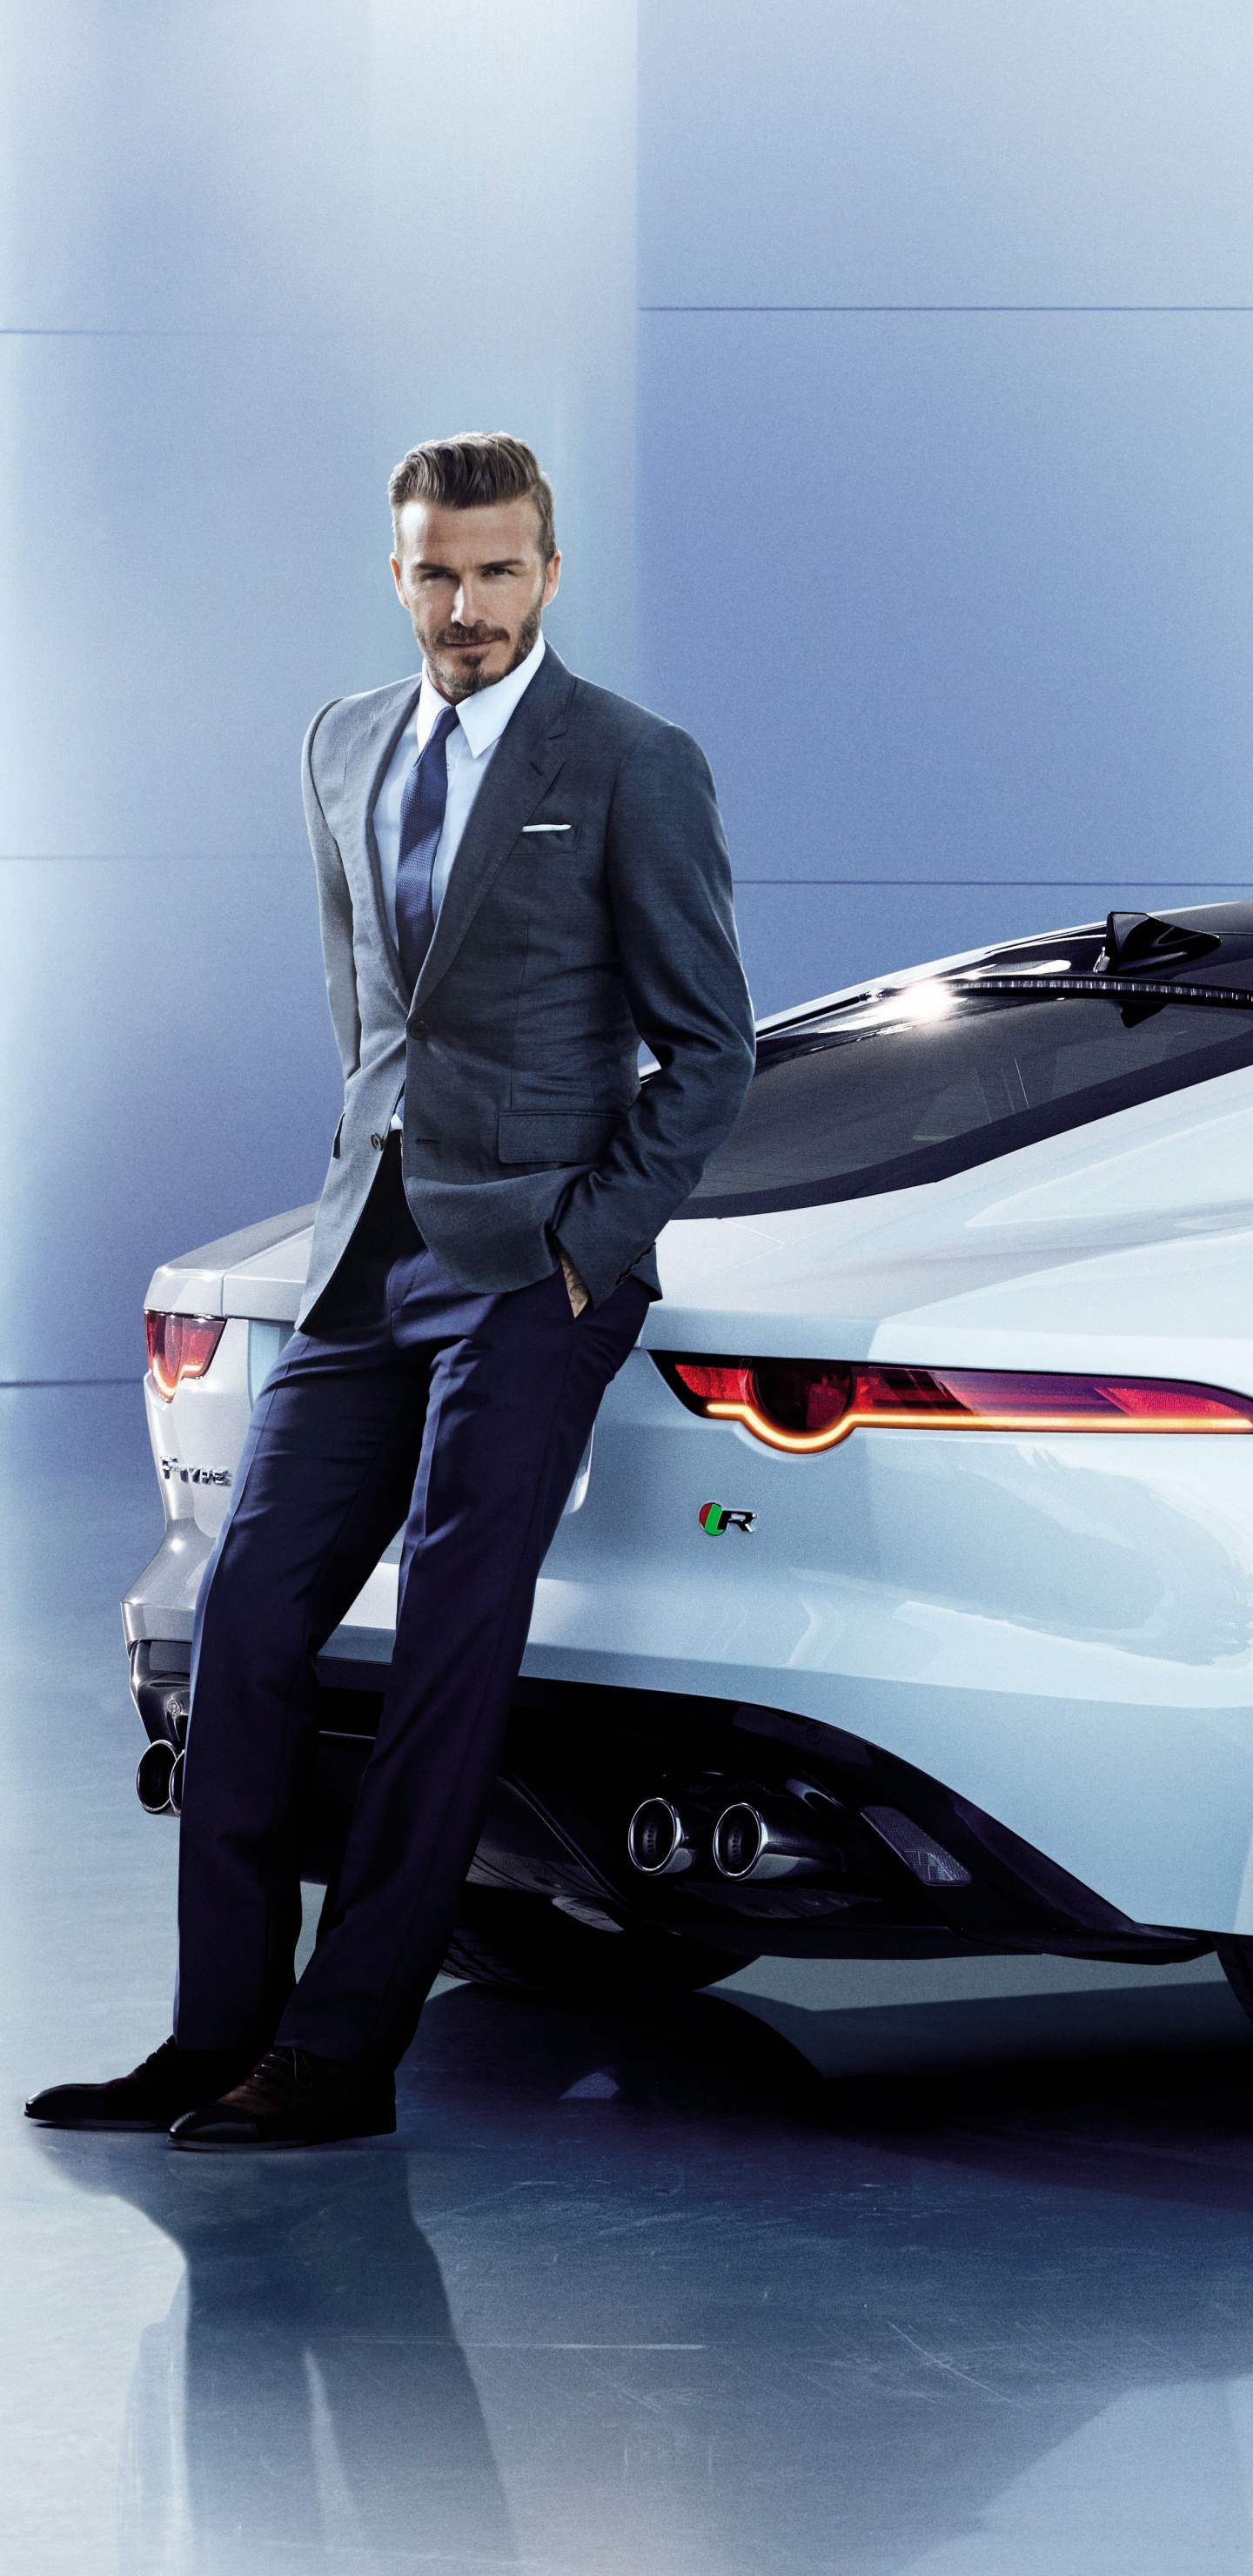 Man in Black Suit Standing Beside White Porsche 911 Coupe. Wallpaper in 1440x2960 Resolution